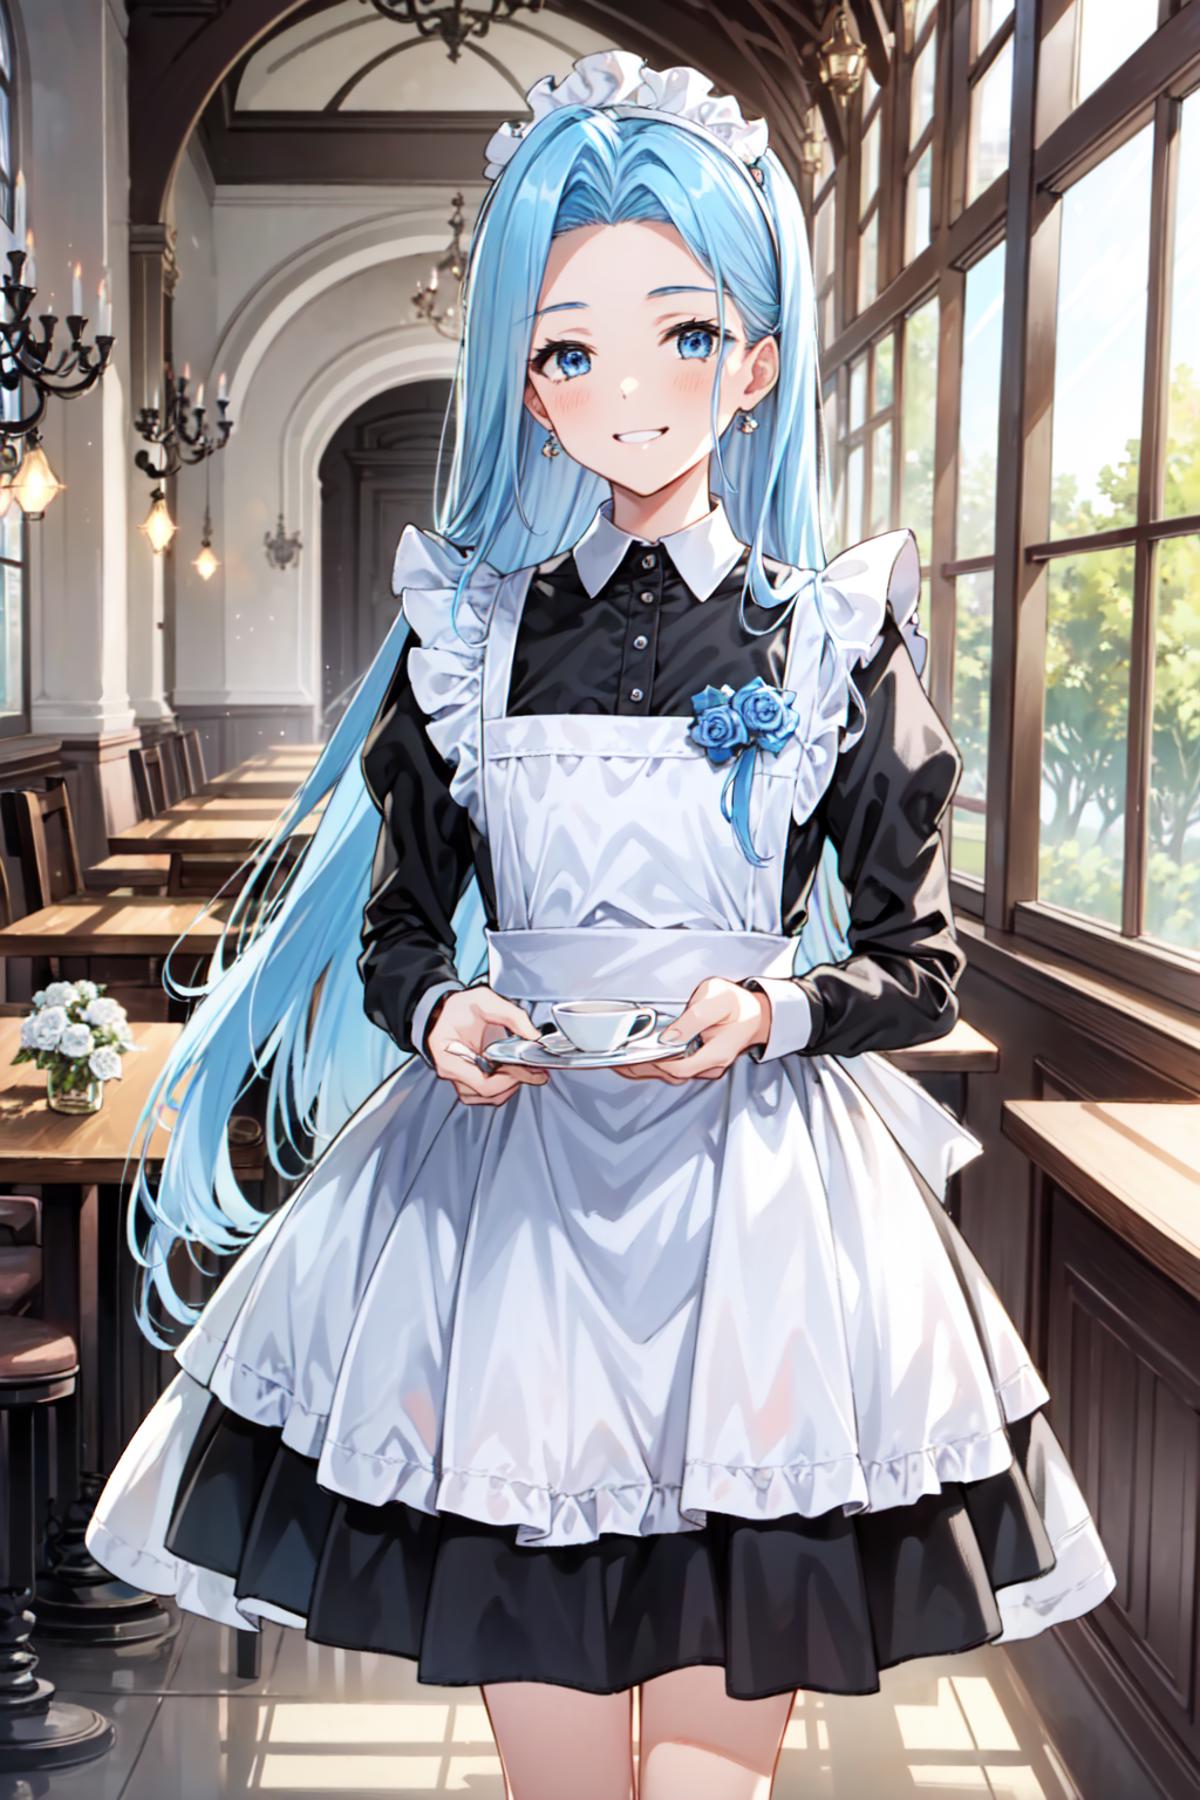 Traditional Maid Dress image by Roast_Chicken